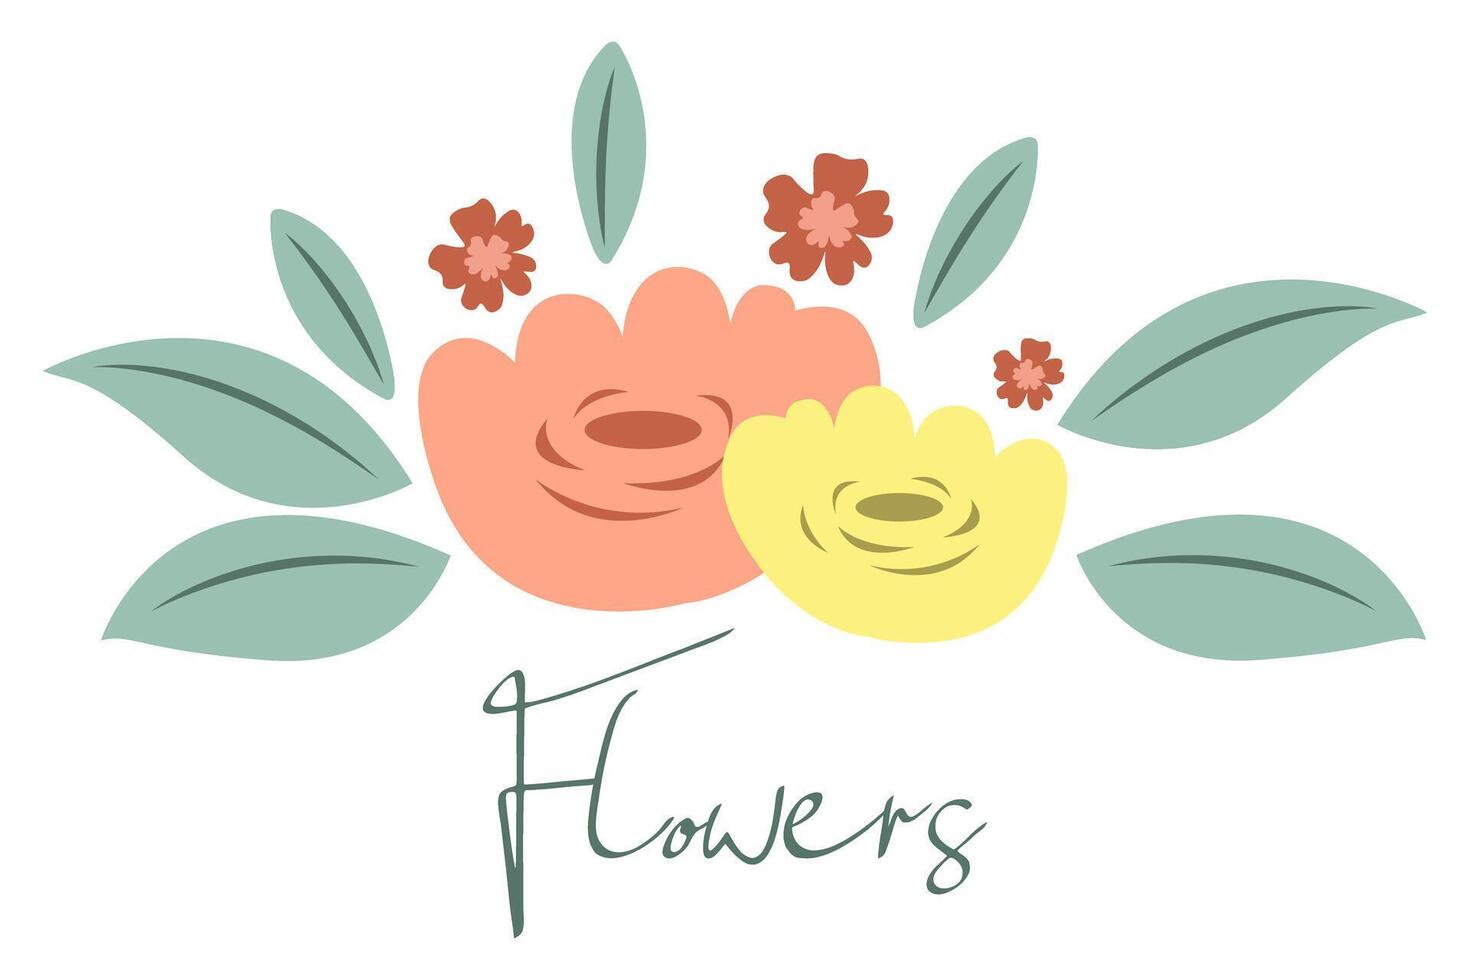 Flowers and leaves in flat design vector